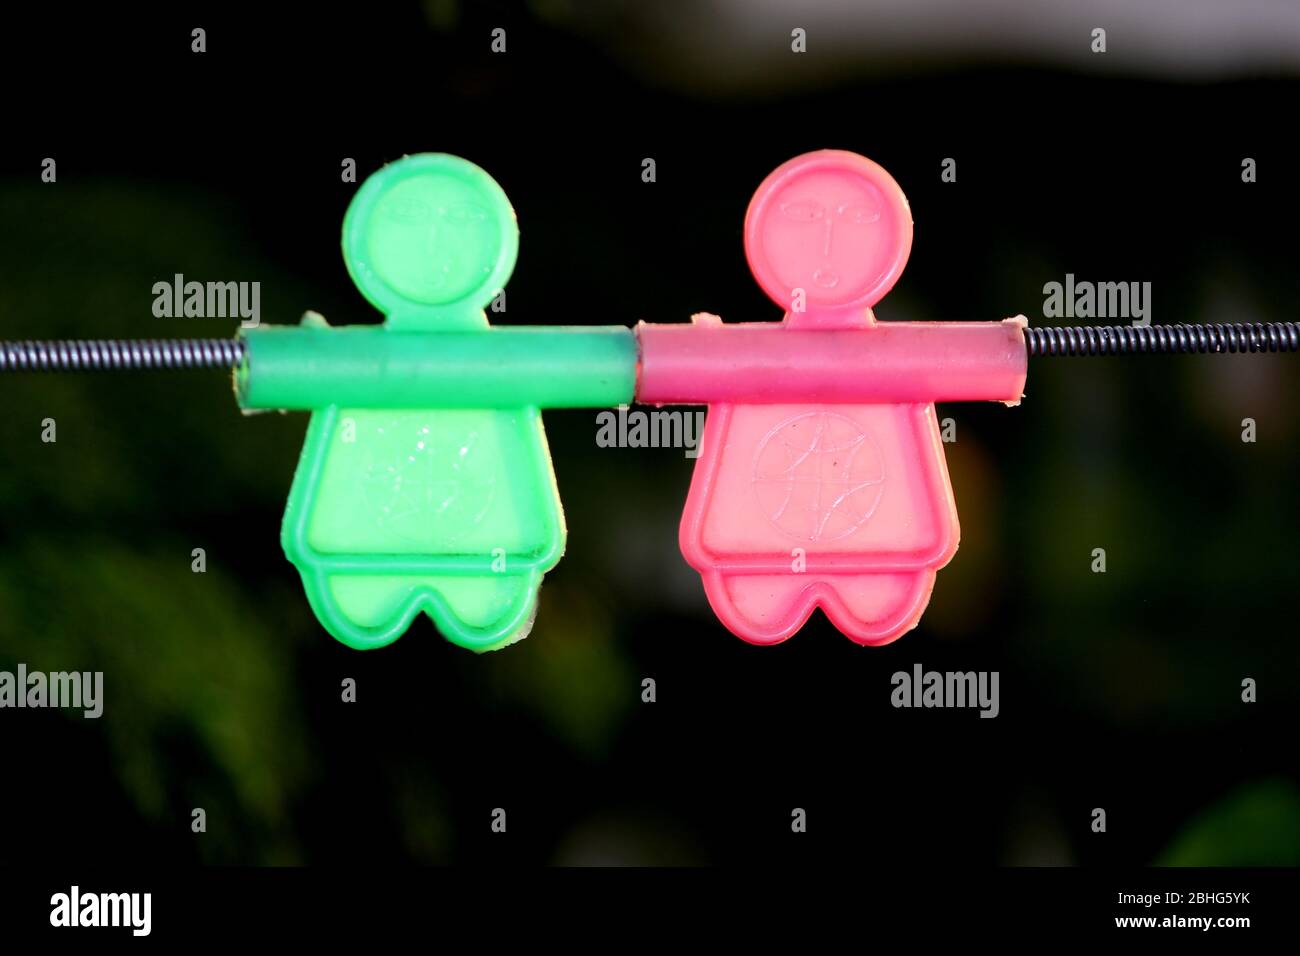 colorful hanging plastic character toy for kids playing, selective focus with blur background. Stock Photo